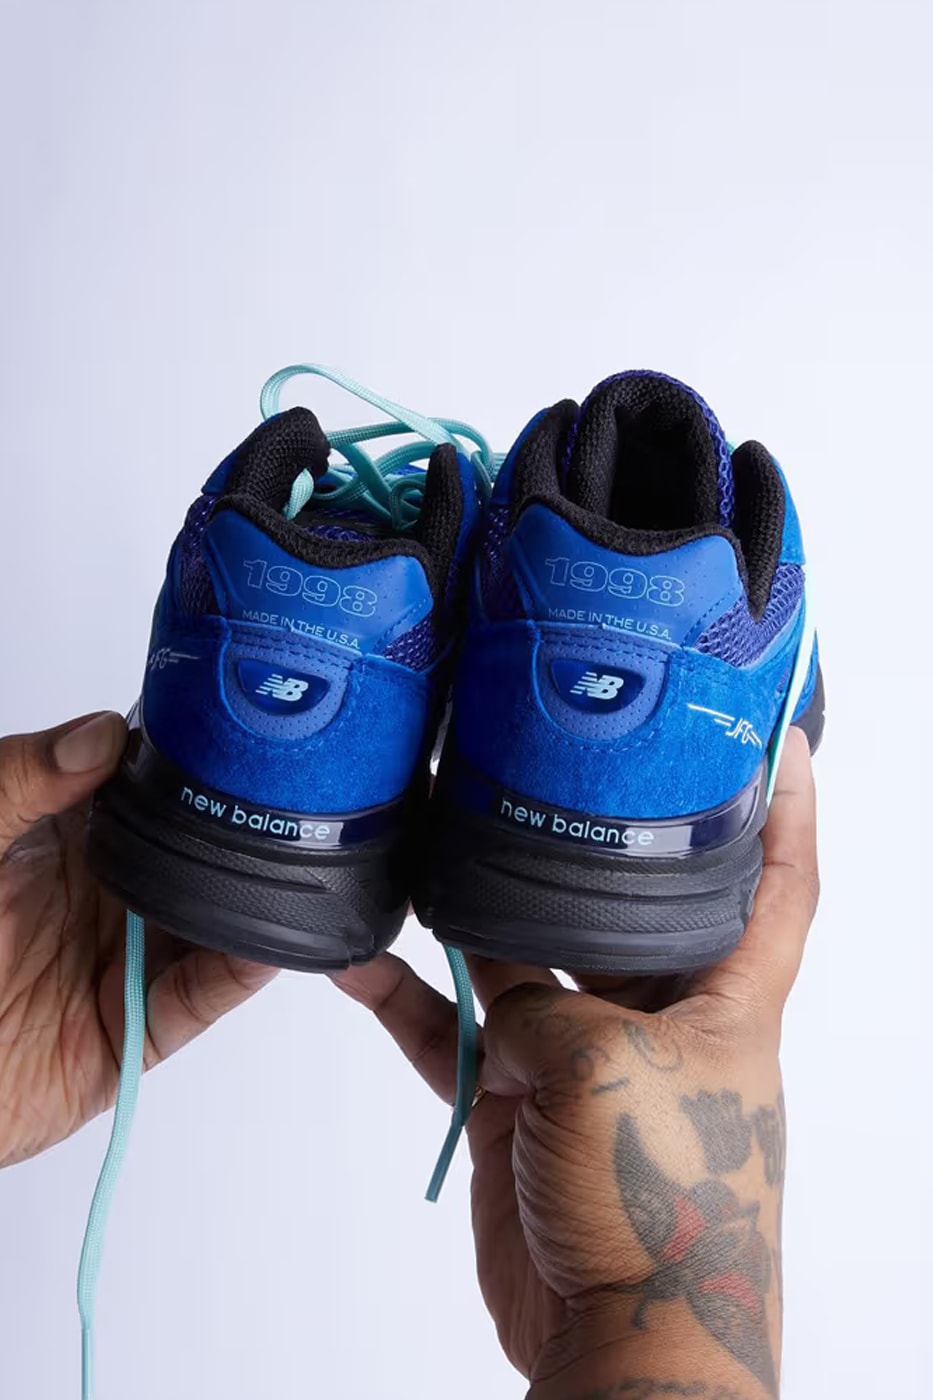 Joe Freshgoods Reveals New Balance 990v4 Collab Inspired by Hype Williams' 'Belly'